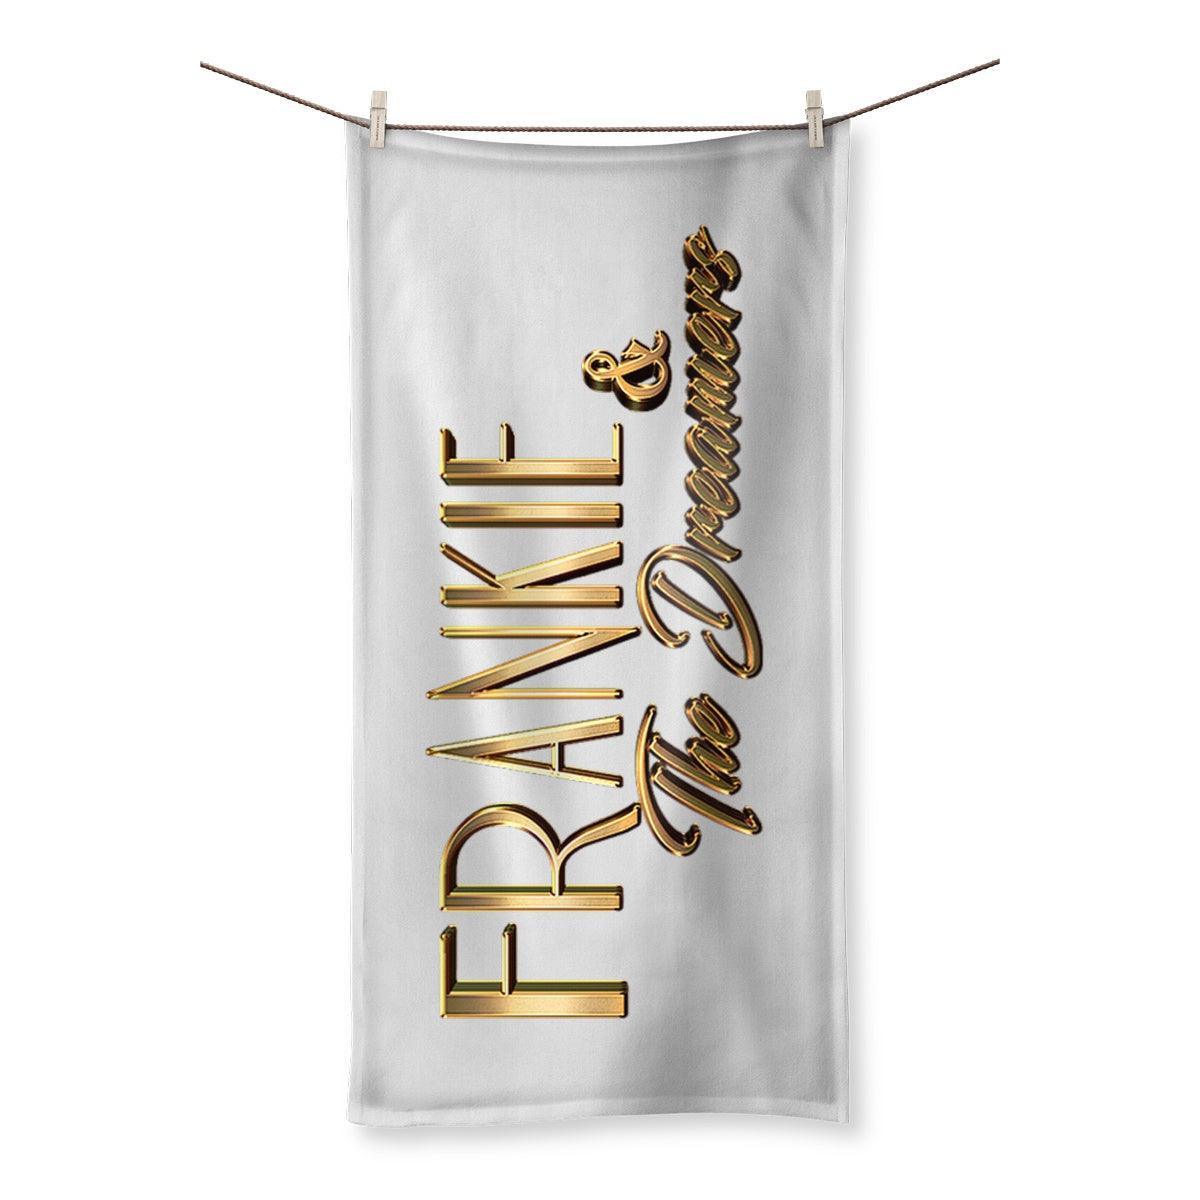 Frankie And The Dreamers Towel | Homeware 27.5"x55.0"